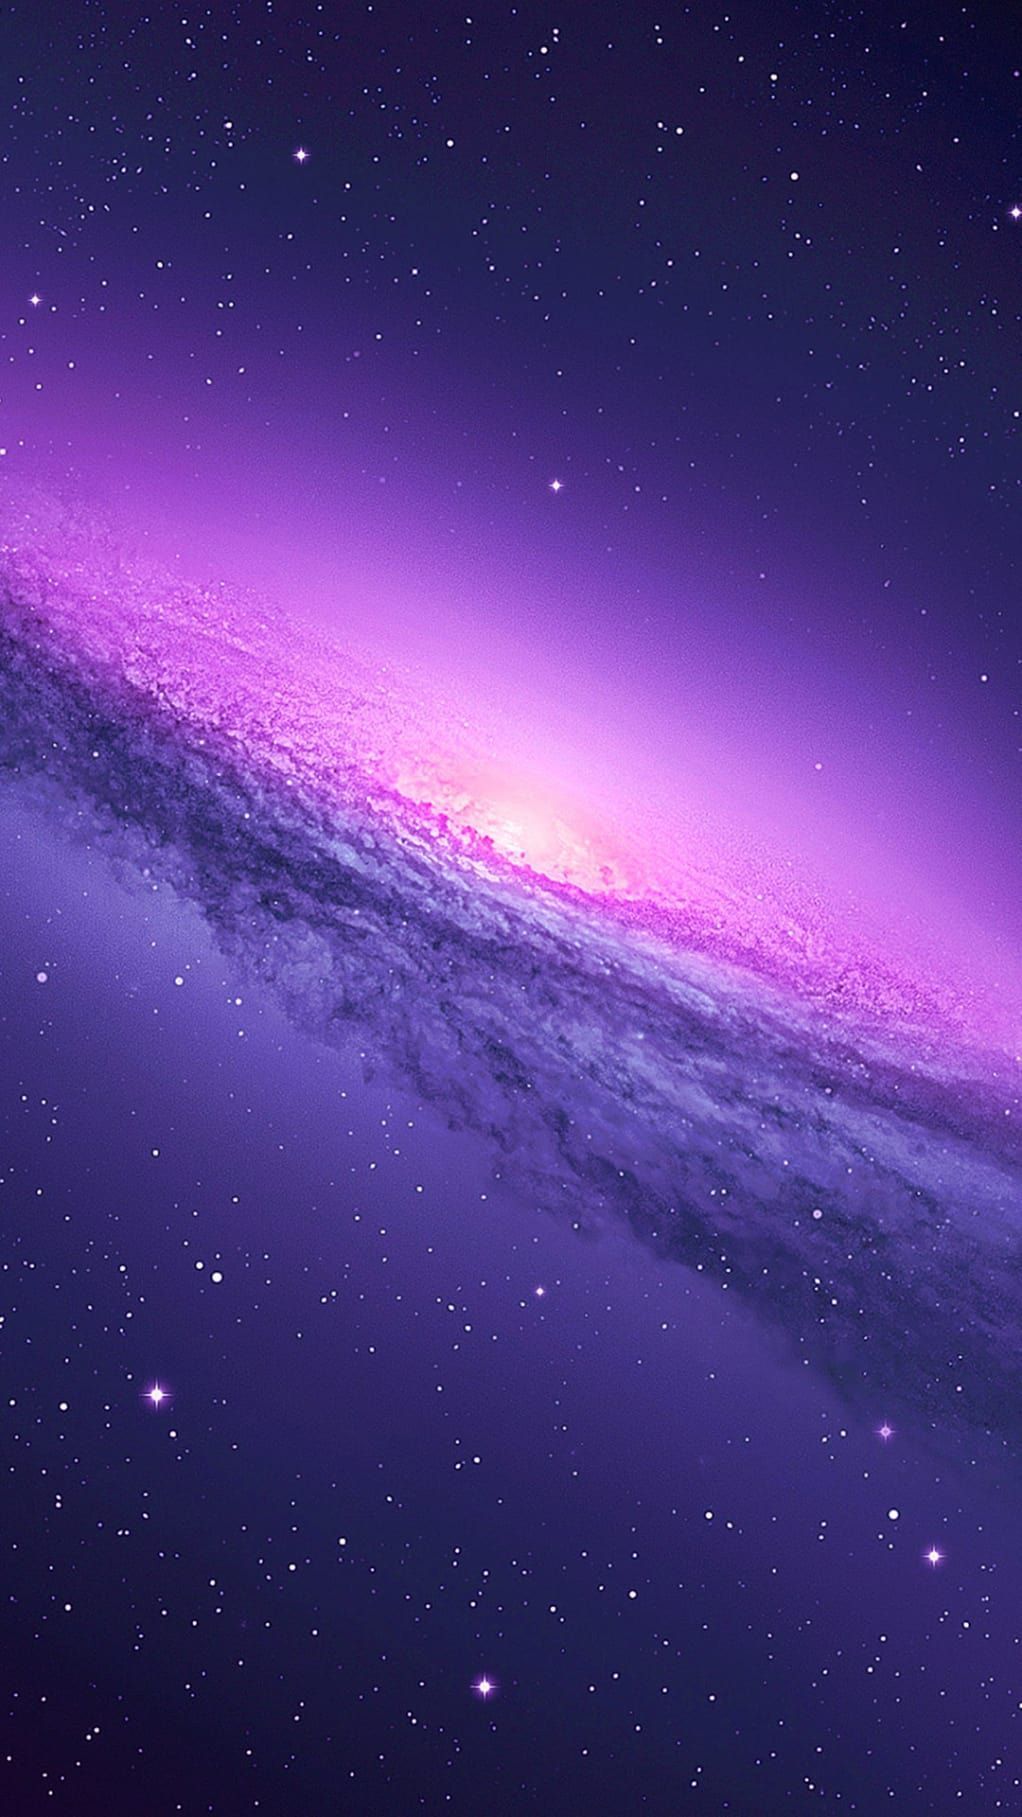 Awesome iPhone 6 Wallpaper. Purple galaxy wallpaper, Cool galaxy wallpaper, iPhone 6 wallpaper background